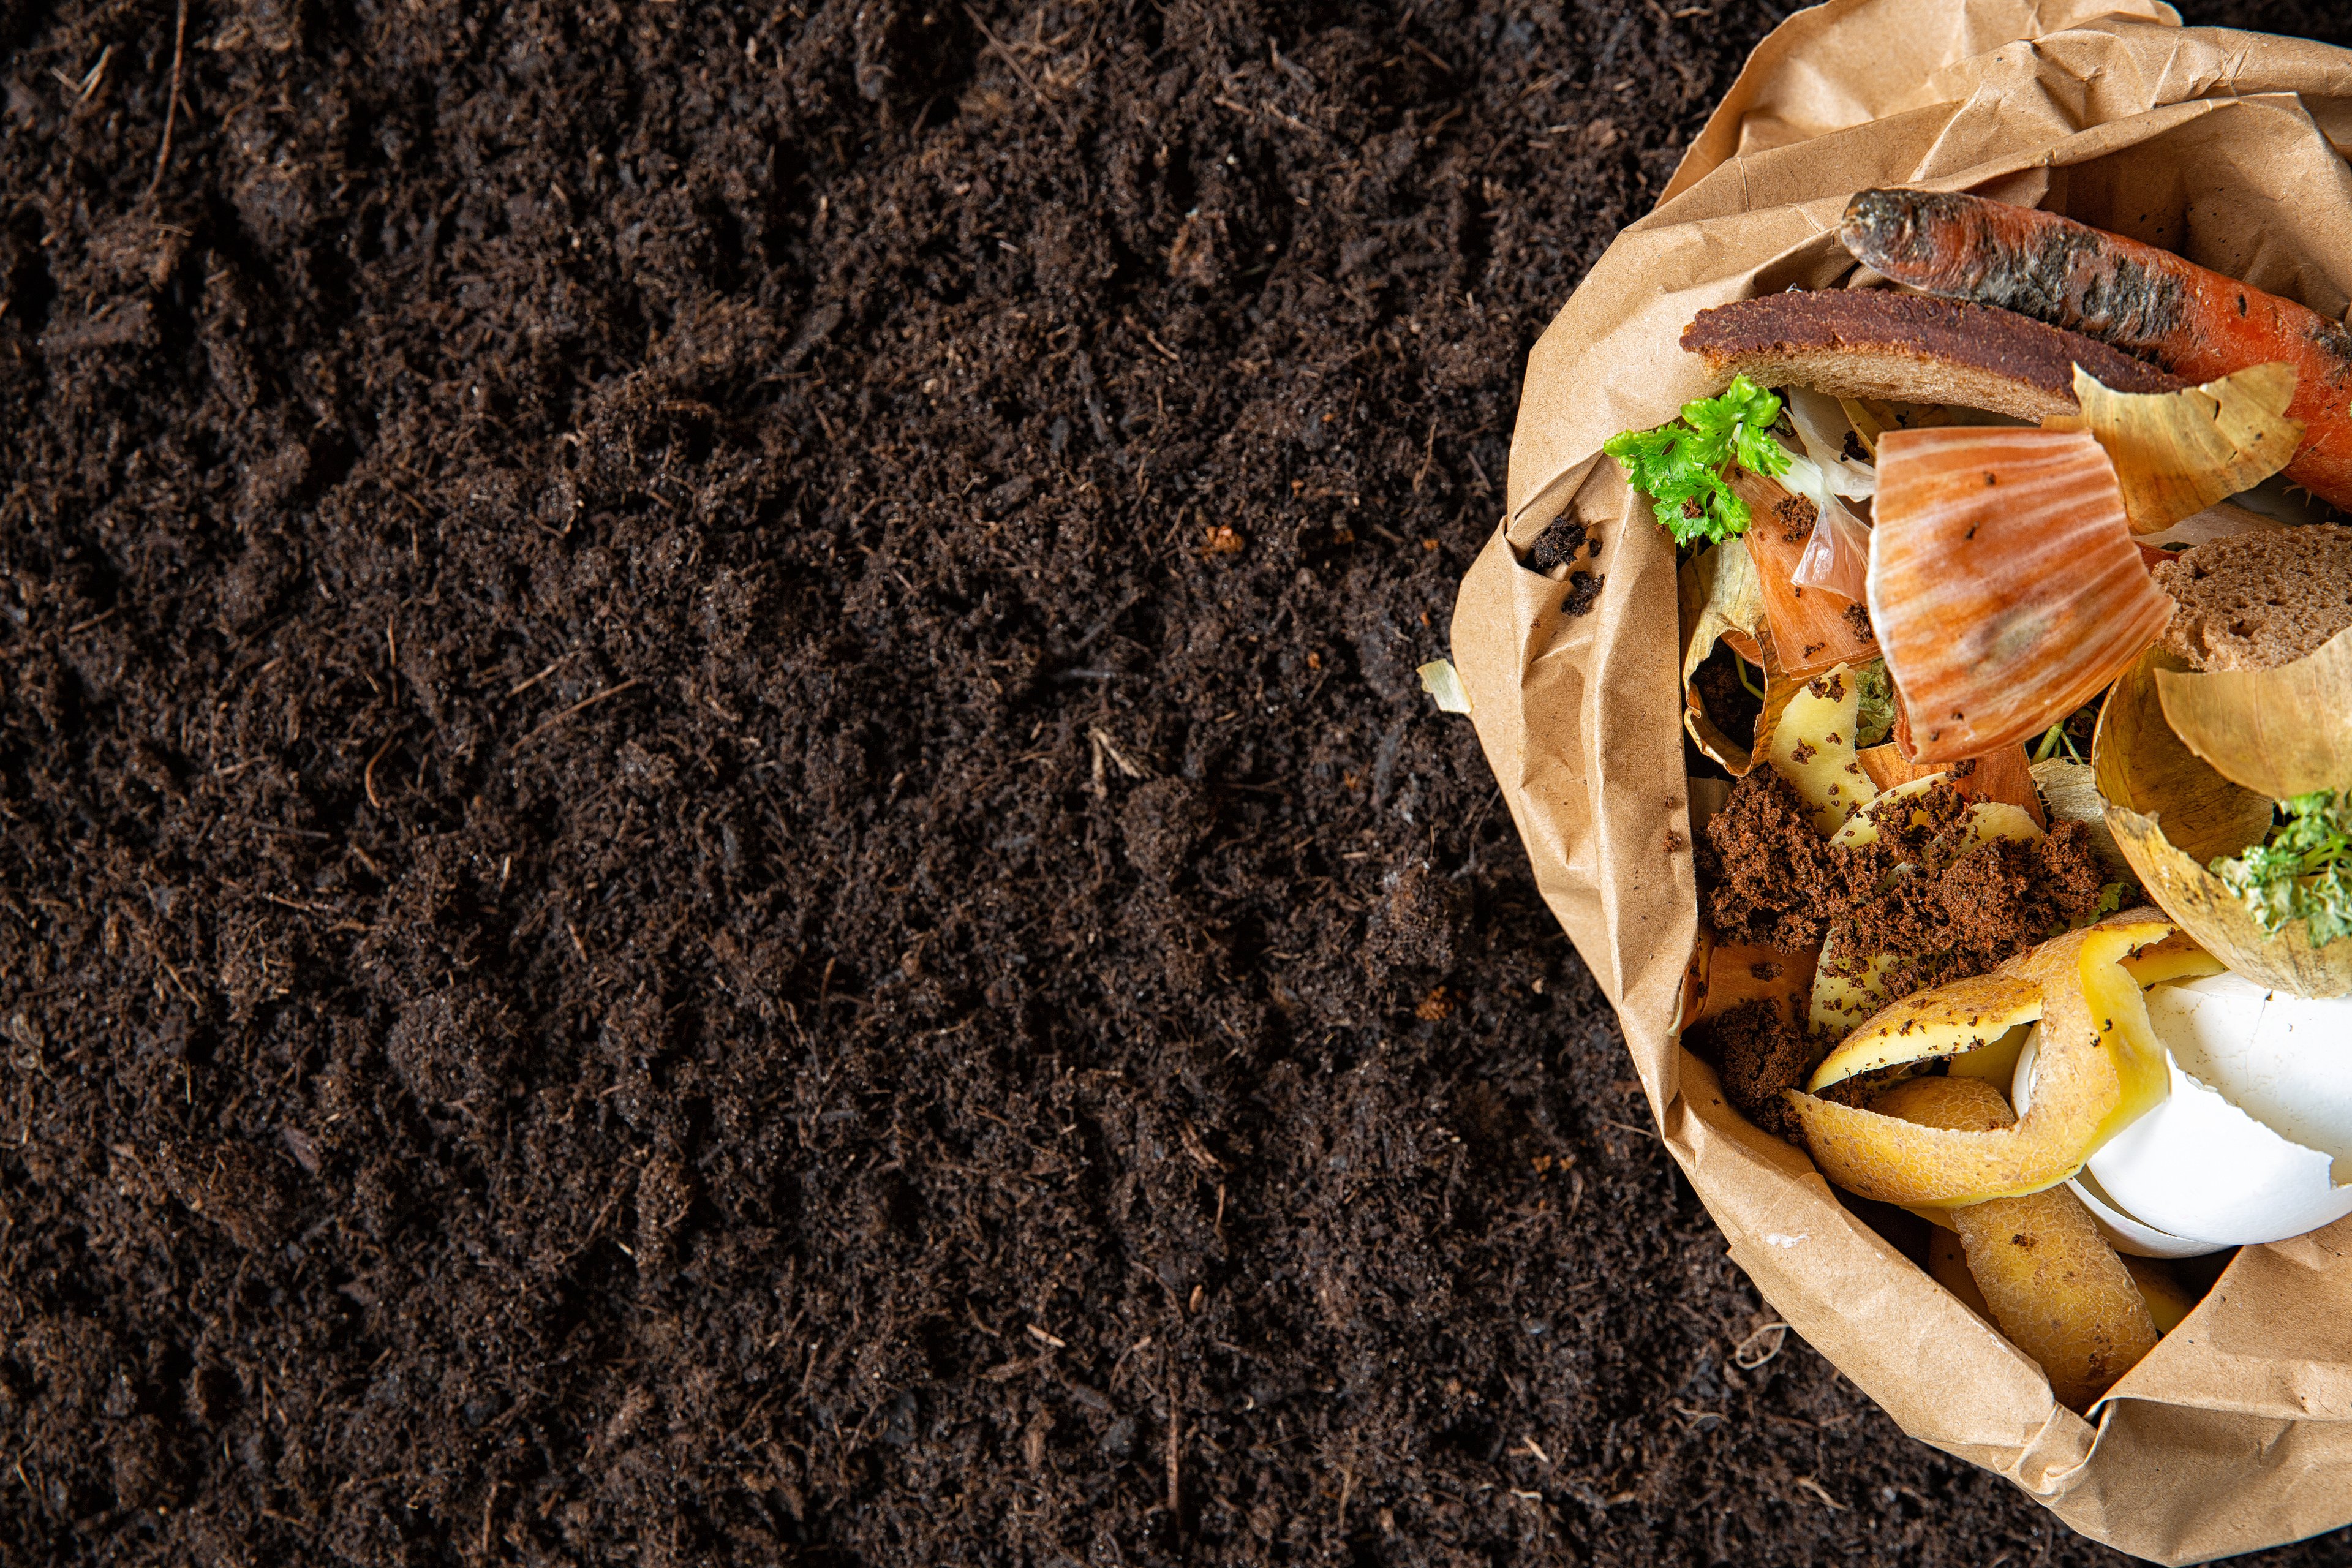 Composting adds beneficial micro-organisms to your soil